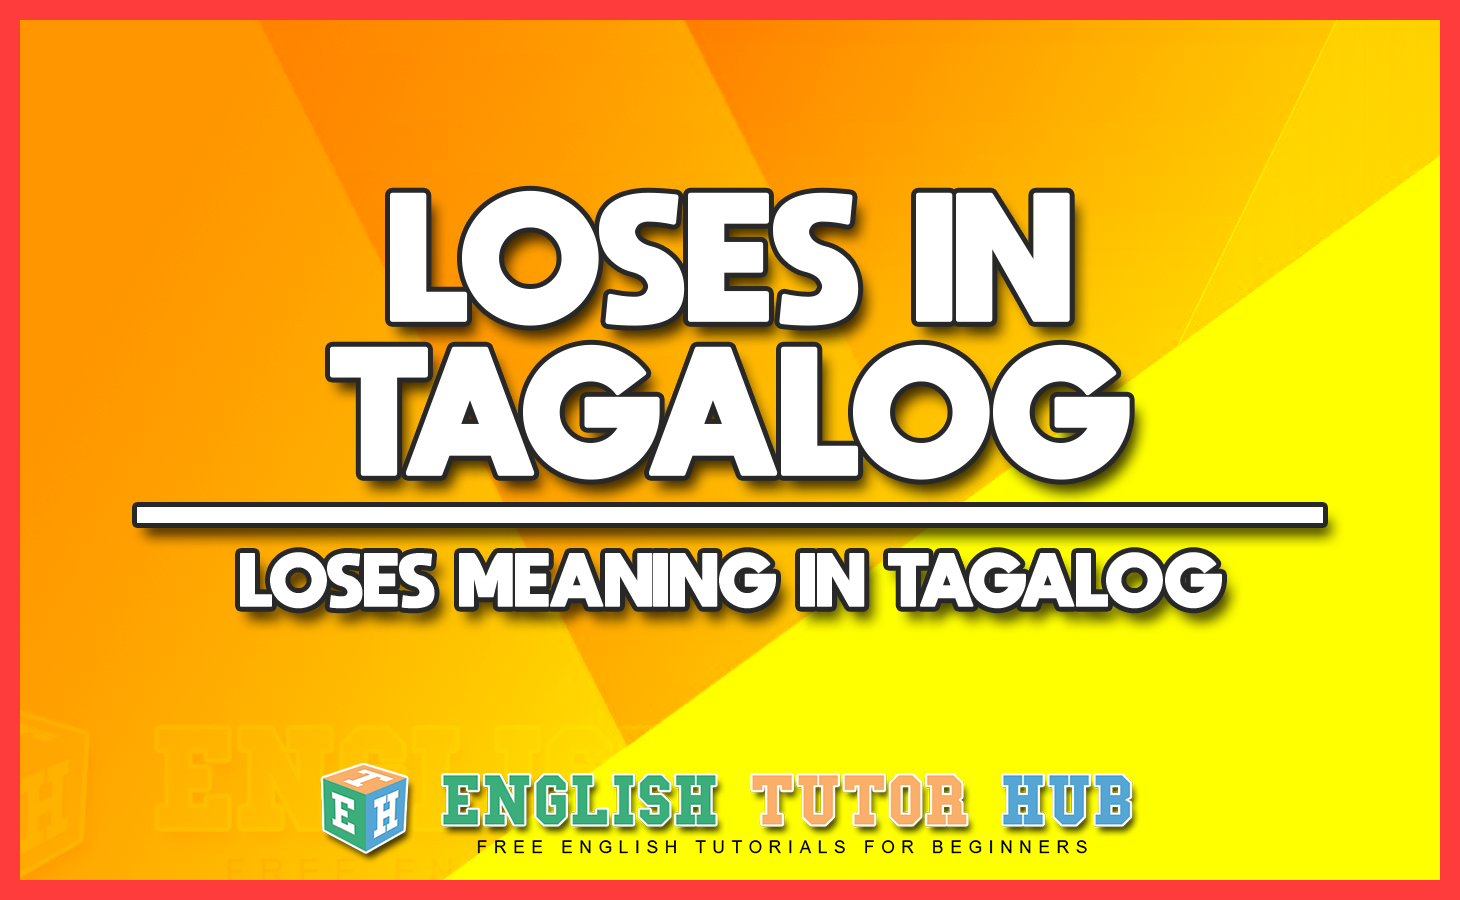 LOSES IN TAGALOG - LOSES MEANING IN TAGALOG